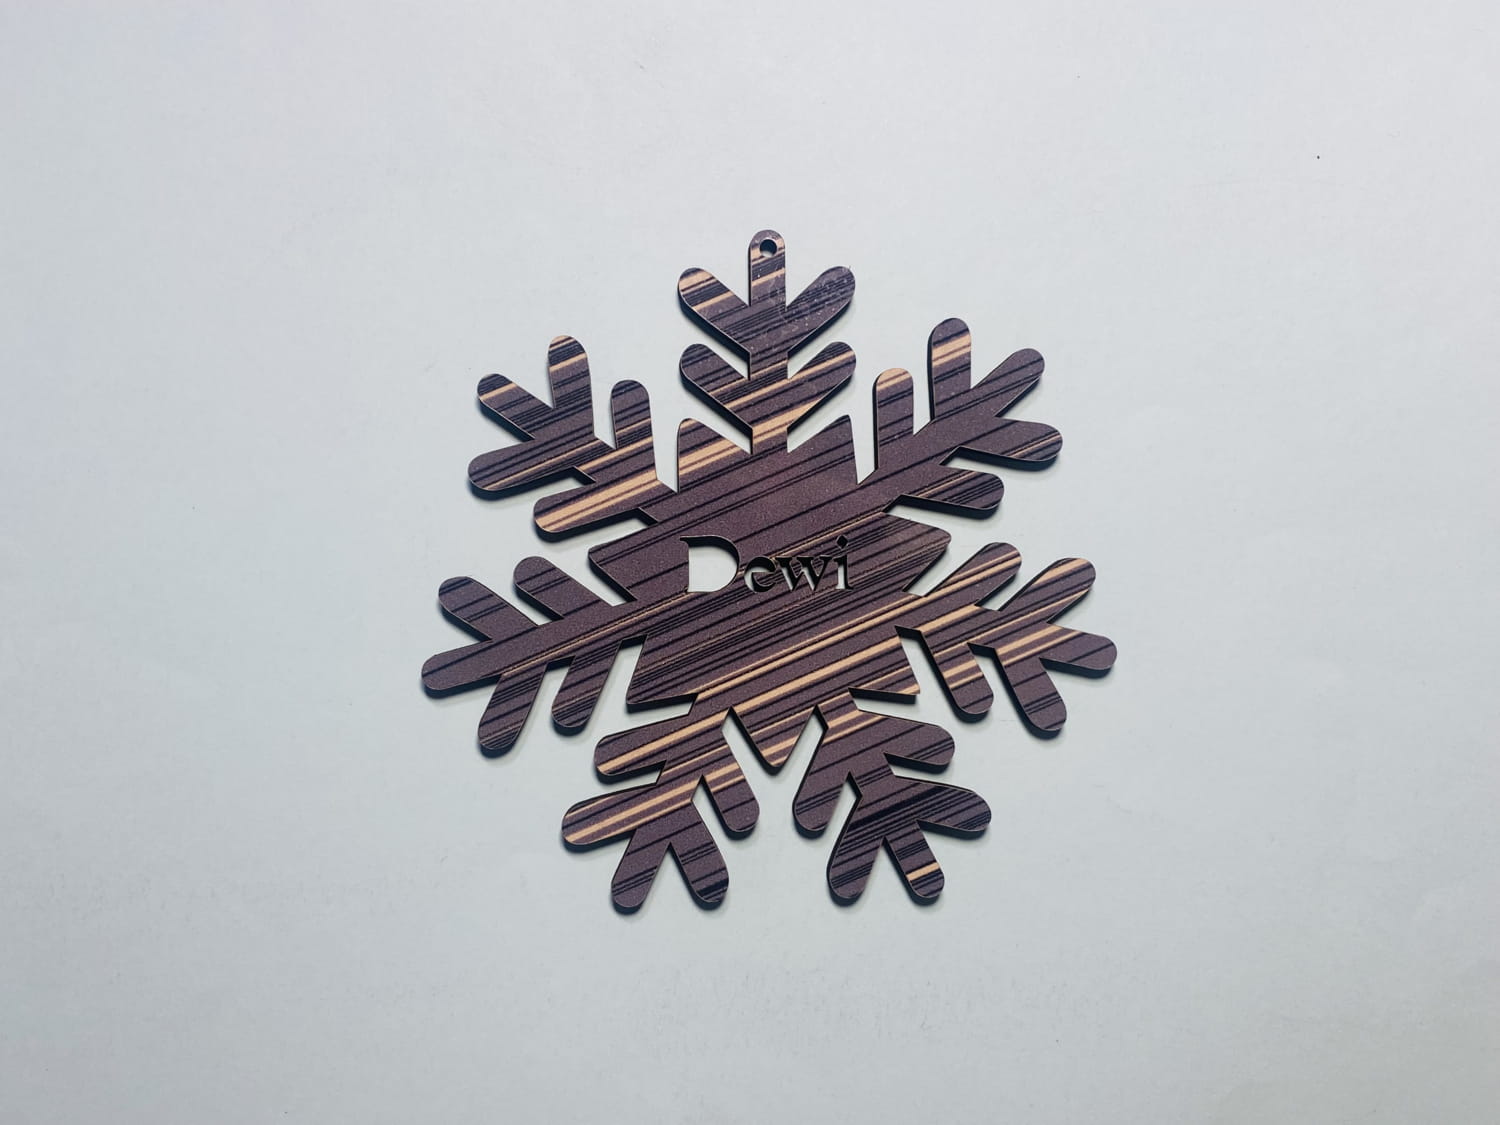 Laser Cut Personalized Wood Snowflake Ornament Free Vector